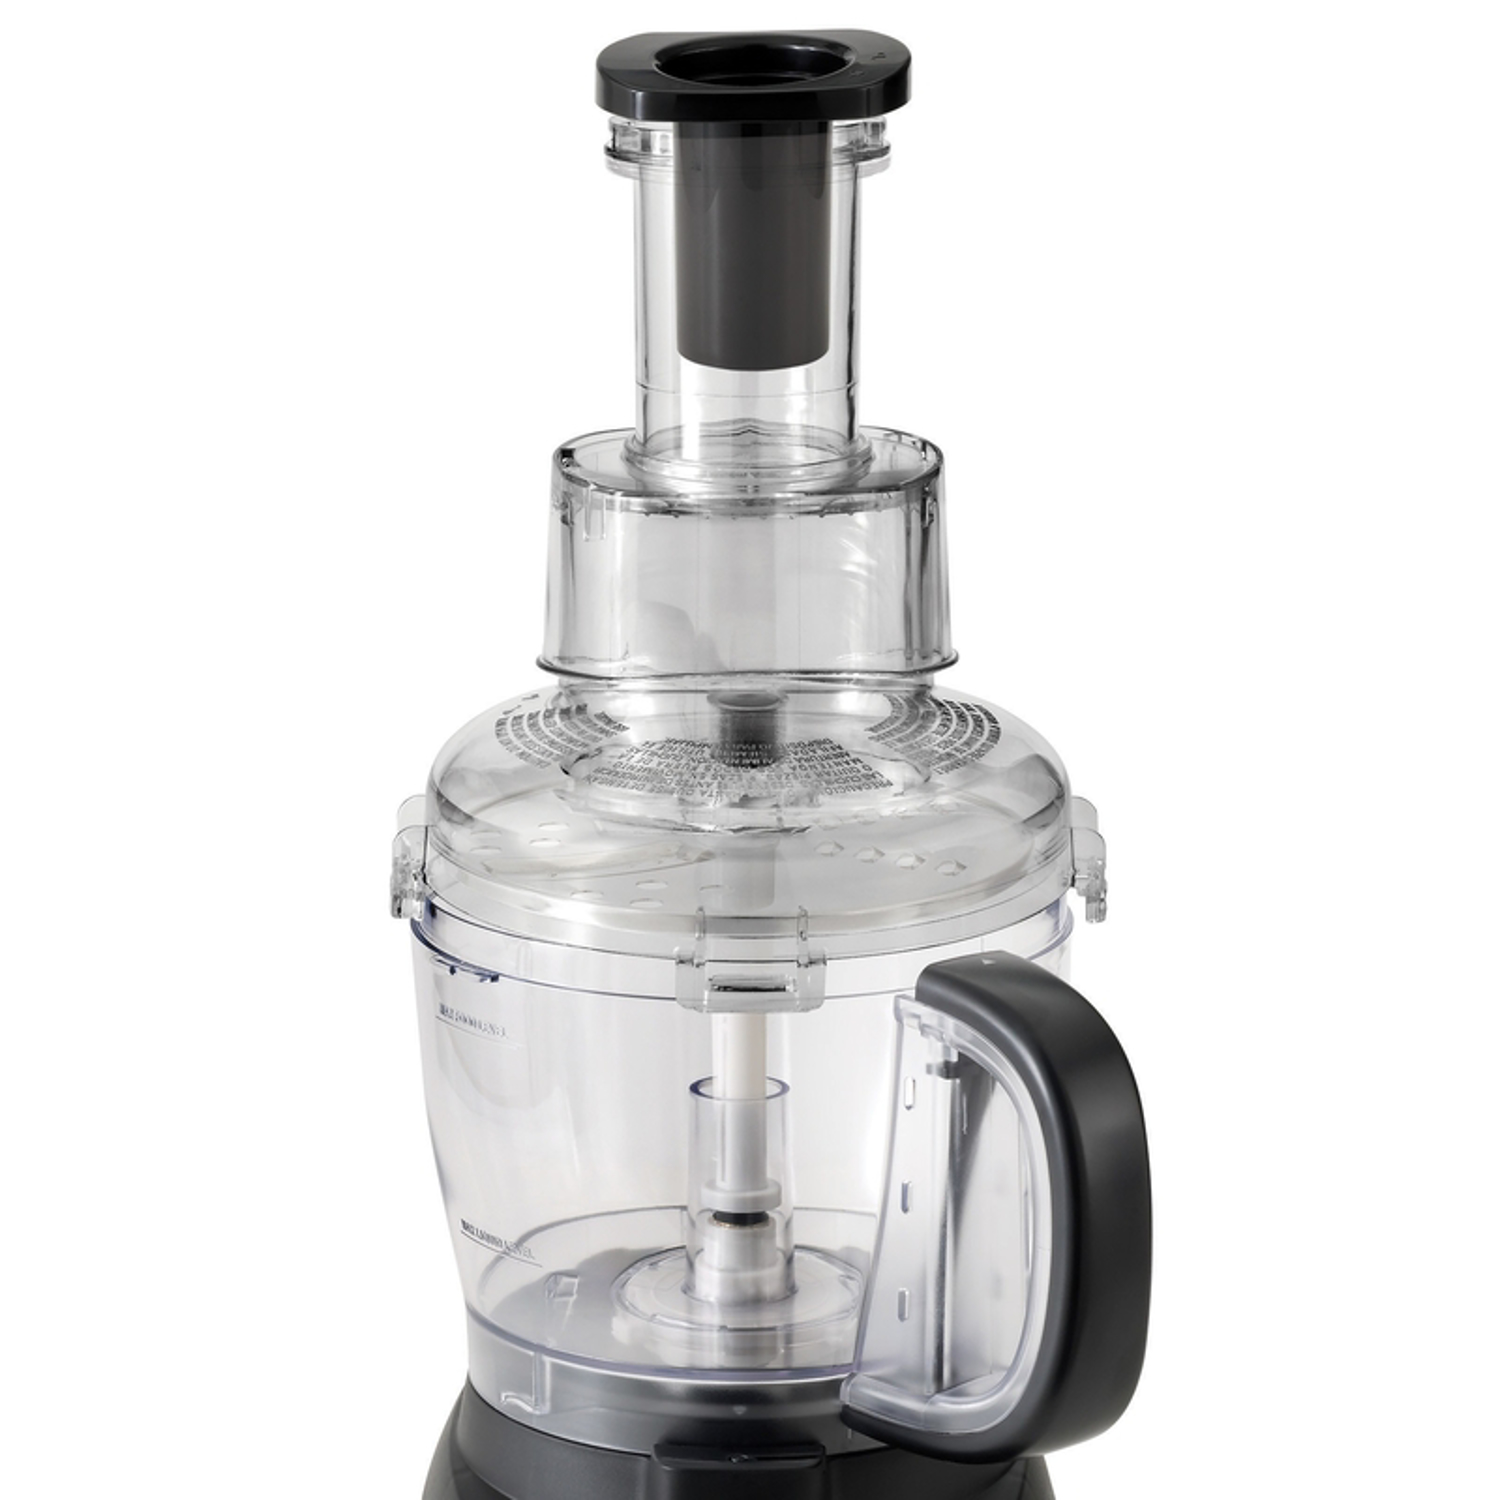 Black & Decker 1.5 Cup One-Touch Food Chopper - Carr Hardware